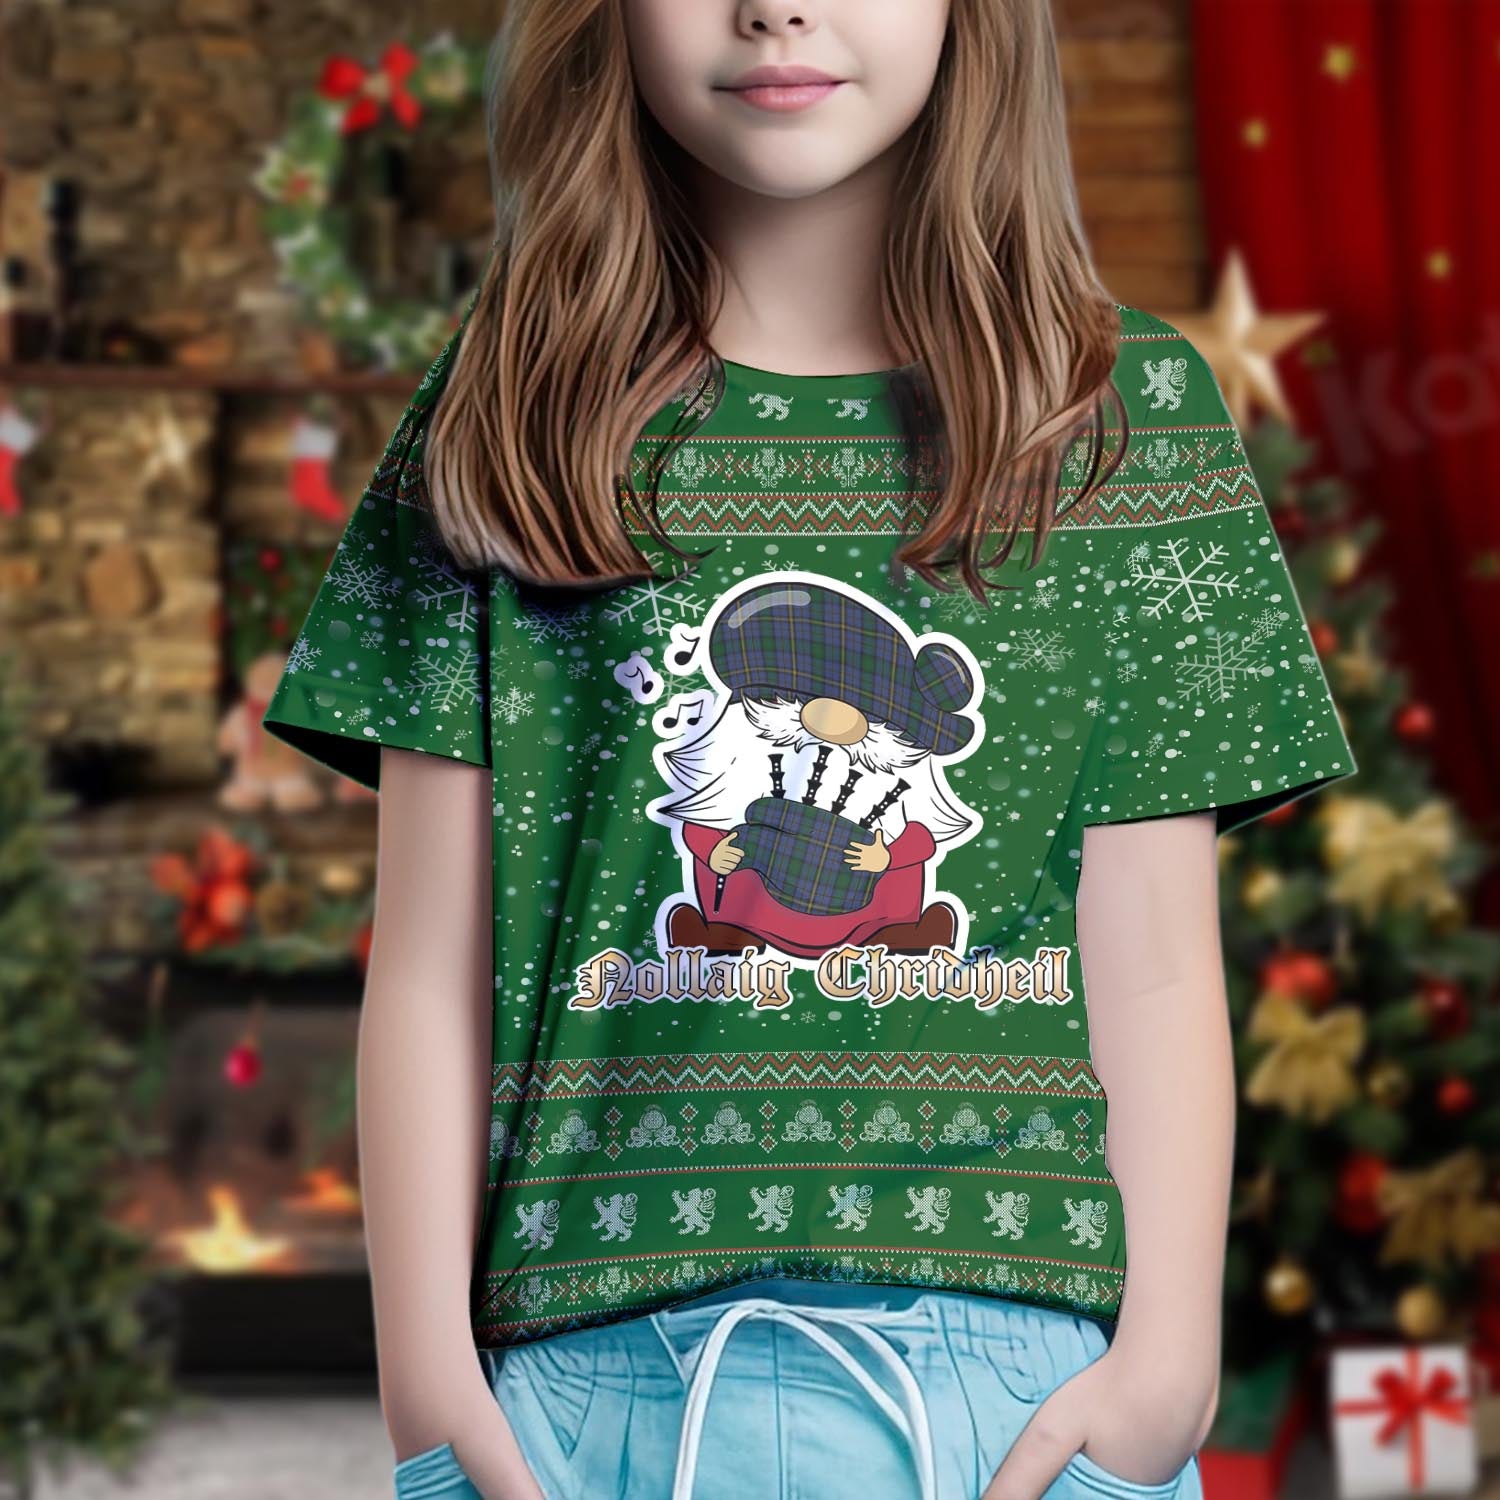 Hope Clan Originaux Clan Christmas Family T-Shirt with Funny Gnome Playing Bagpipes Kid's Shirt Green - Tartanvibesclothing